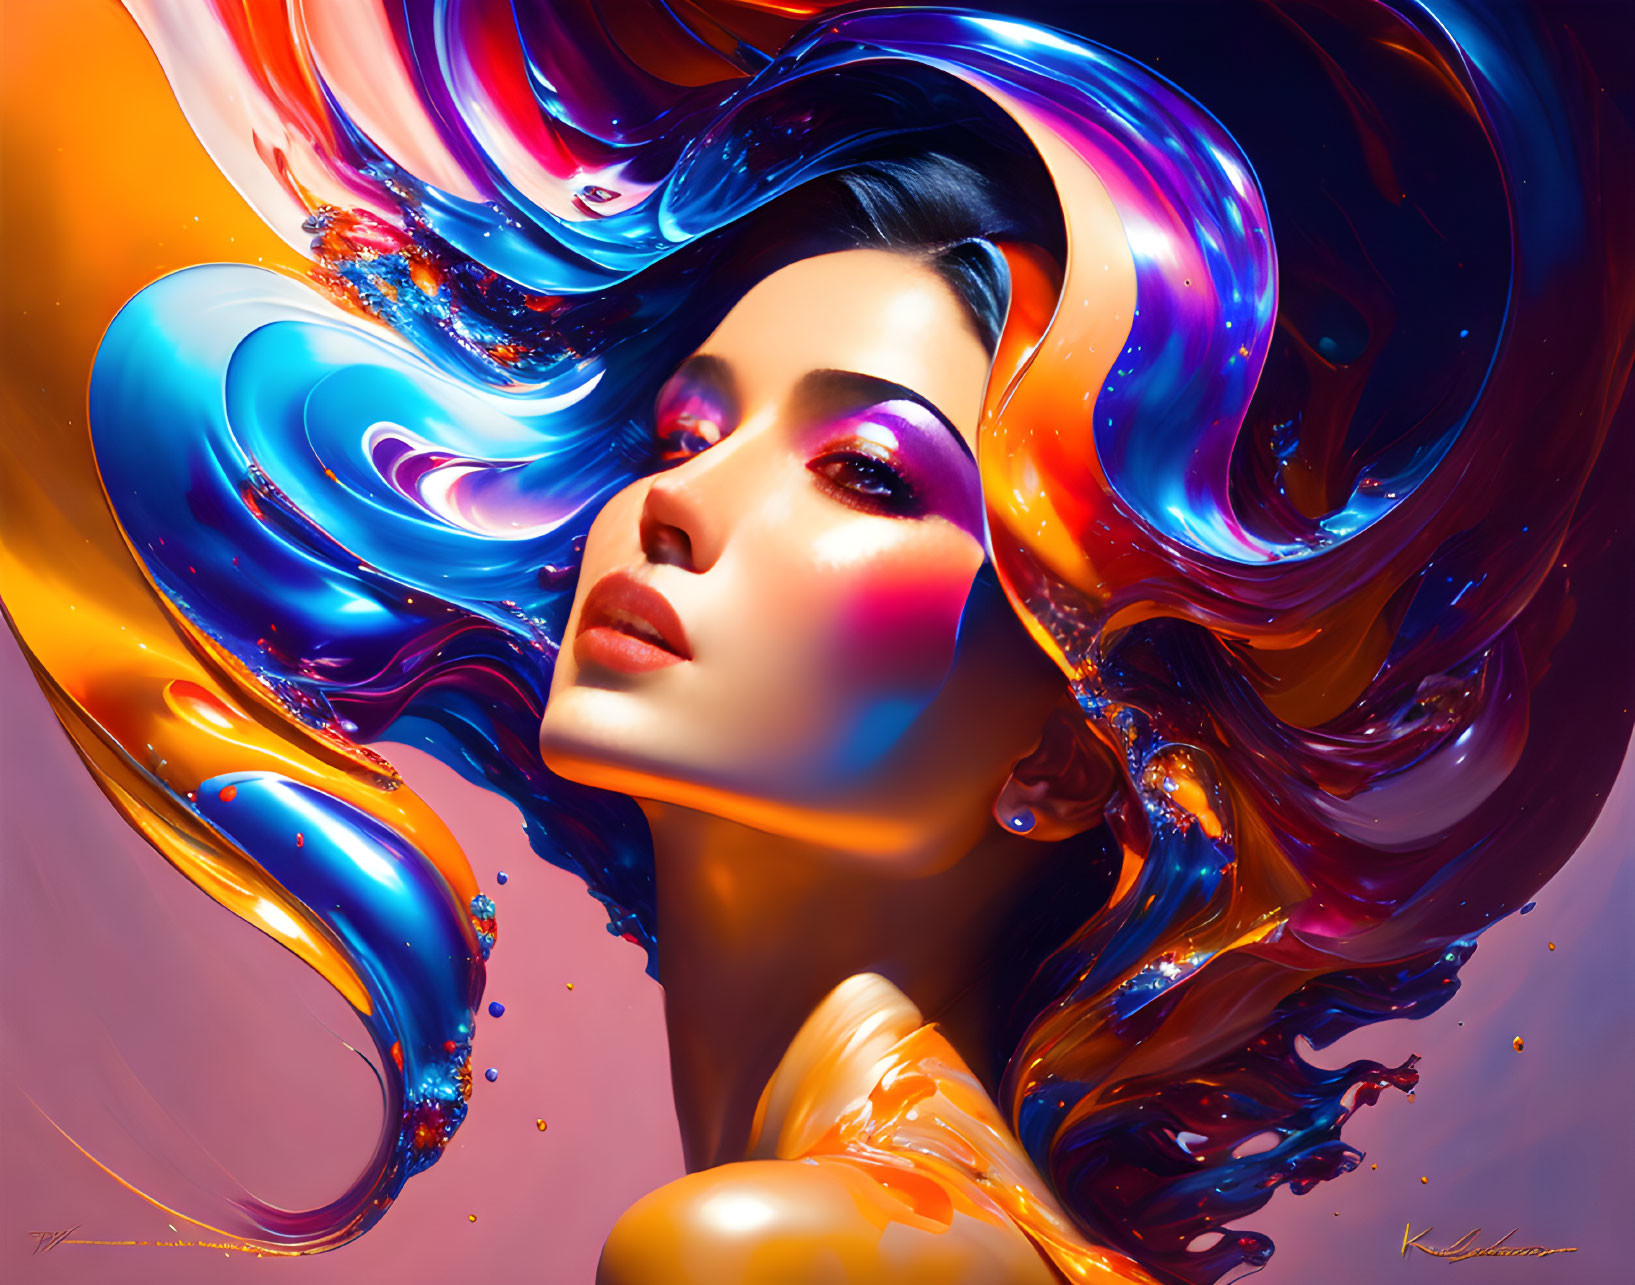 Colorful Digital Artwork: Woman with Flowing Hair and Liquid Swirls